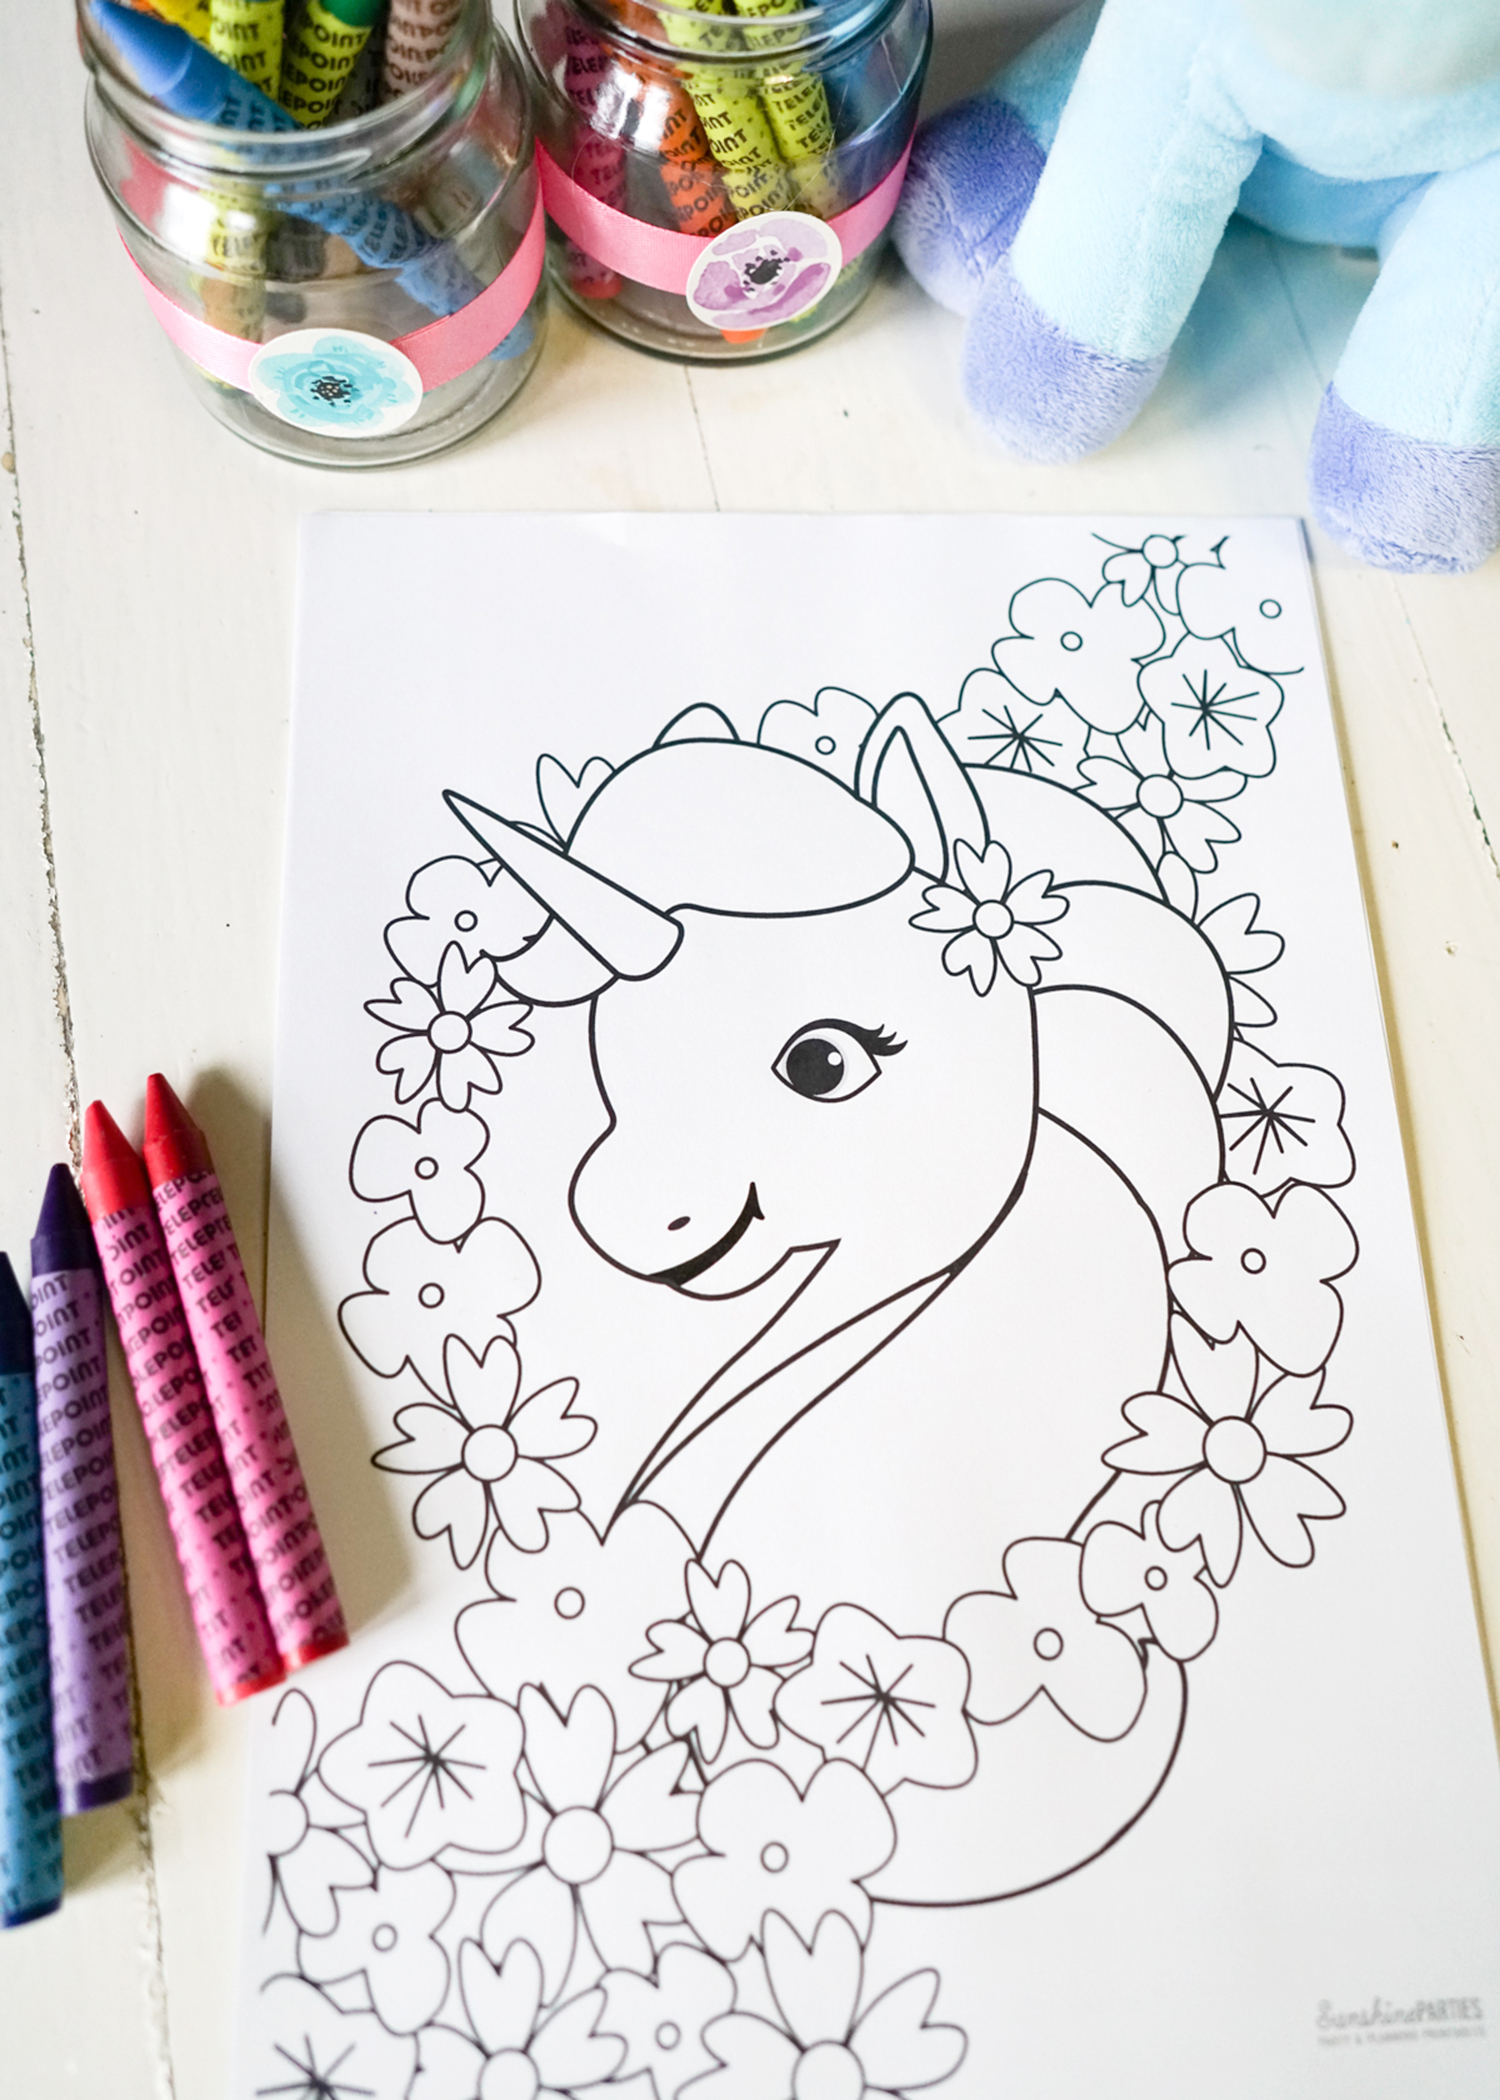 Unicorn coloring page to download and color